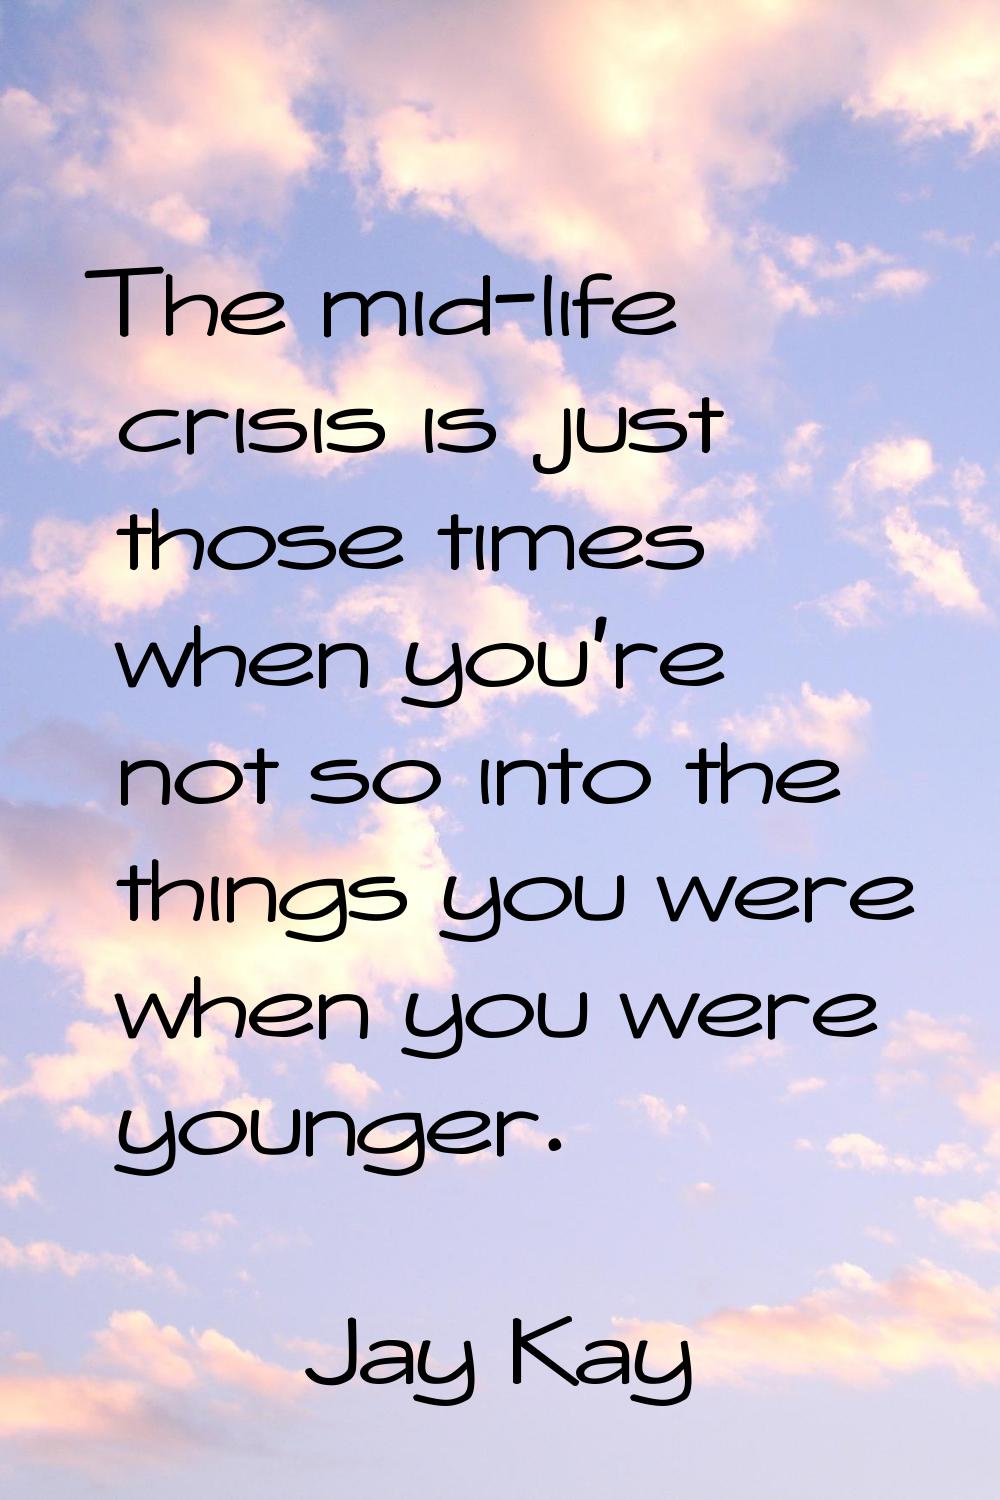 The mid-life crisis is just those times when you're not so into the things you were when you were y